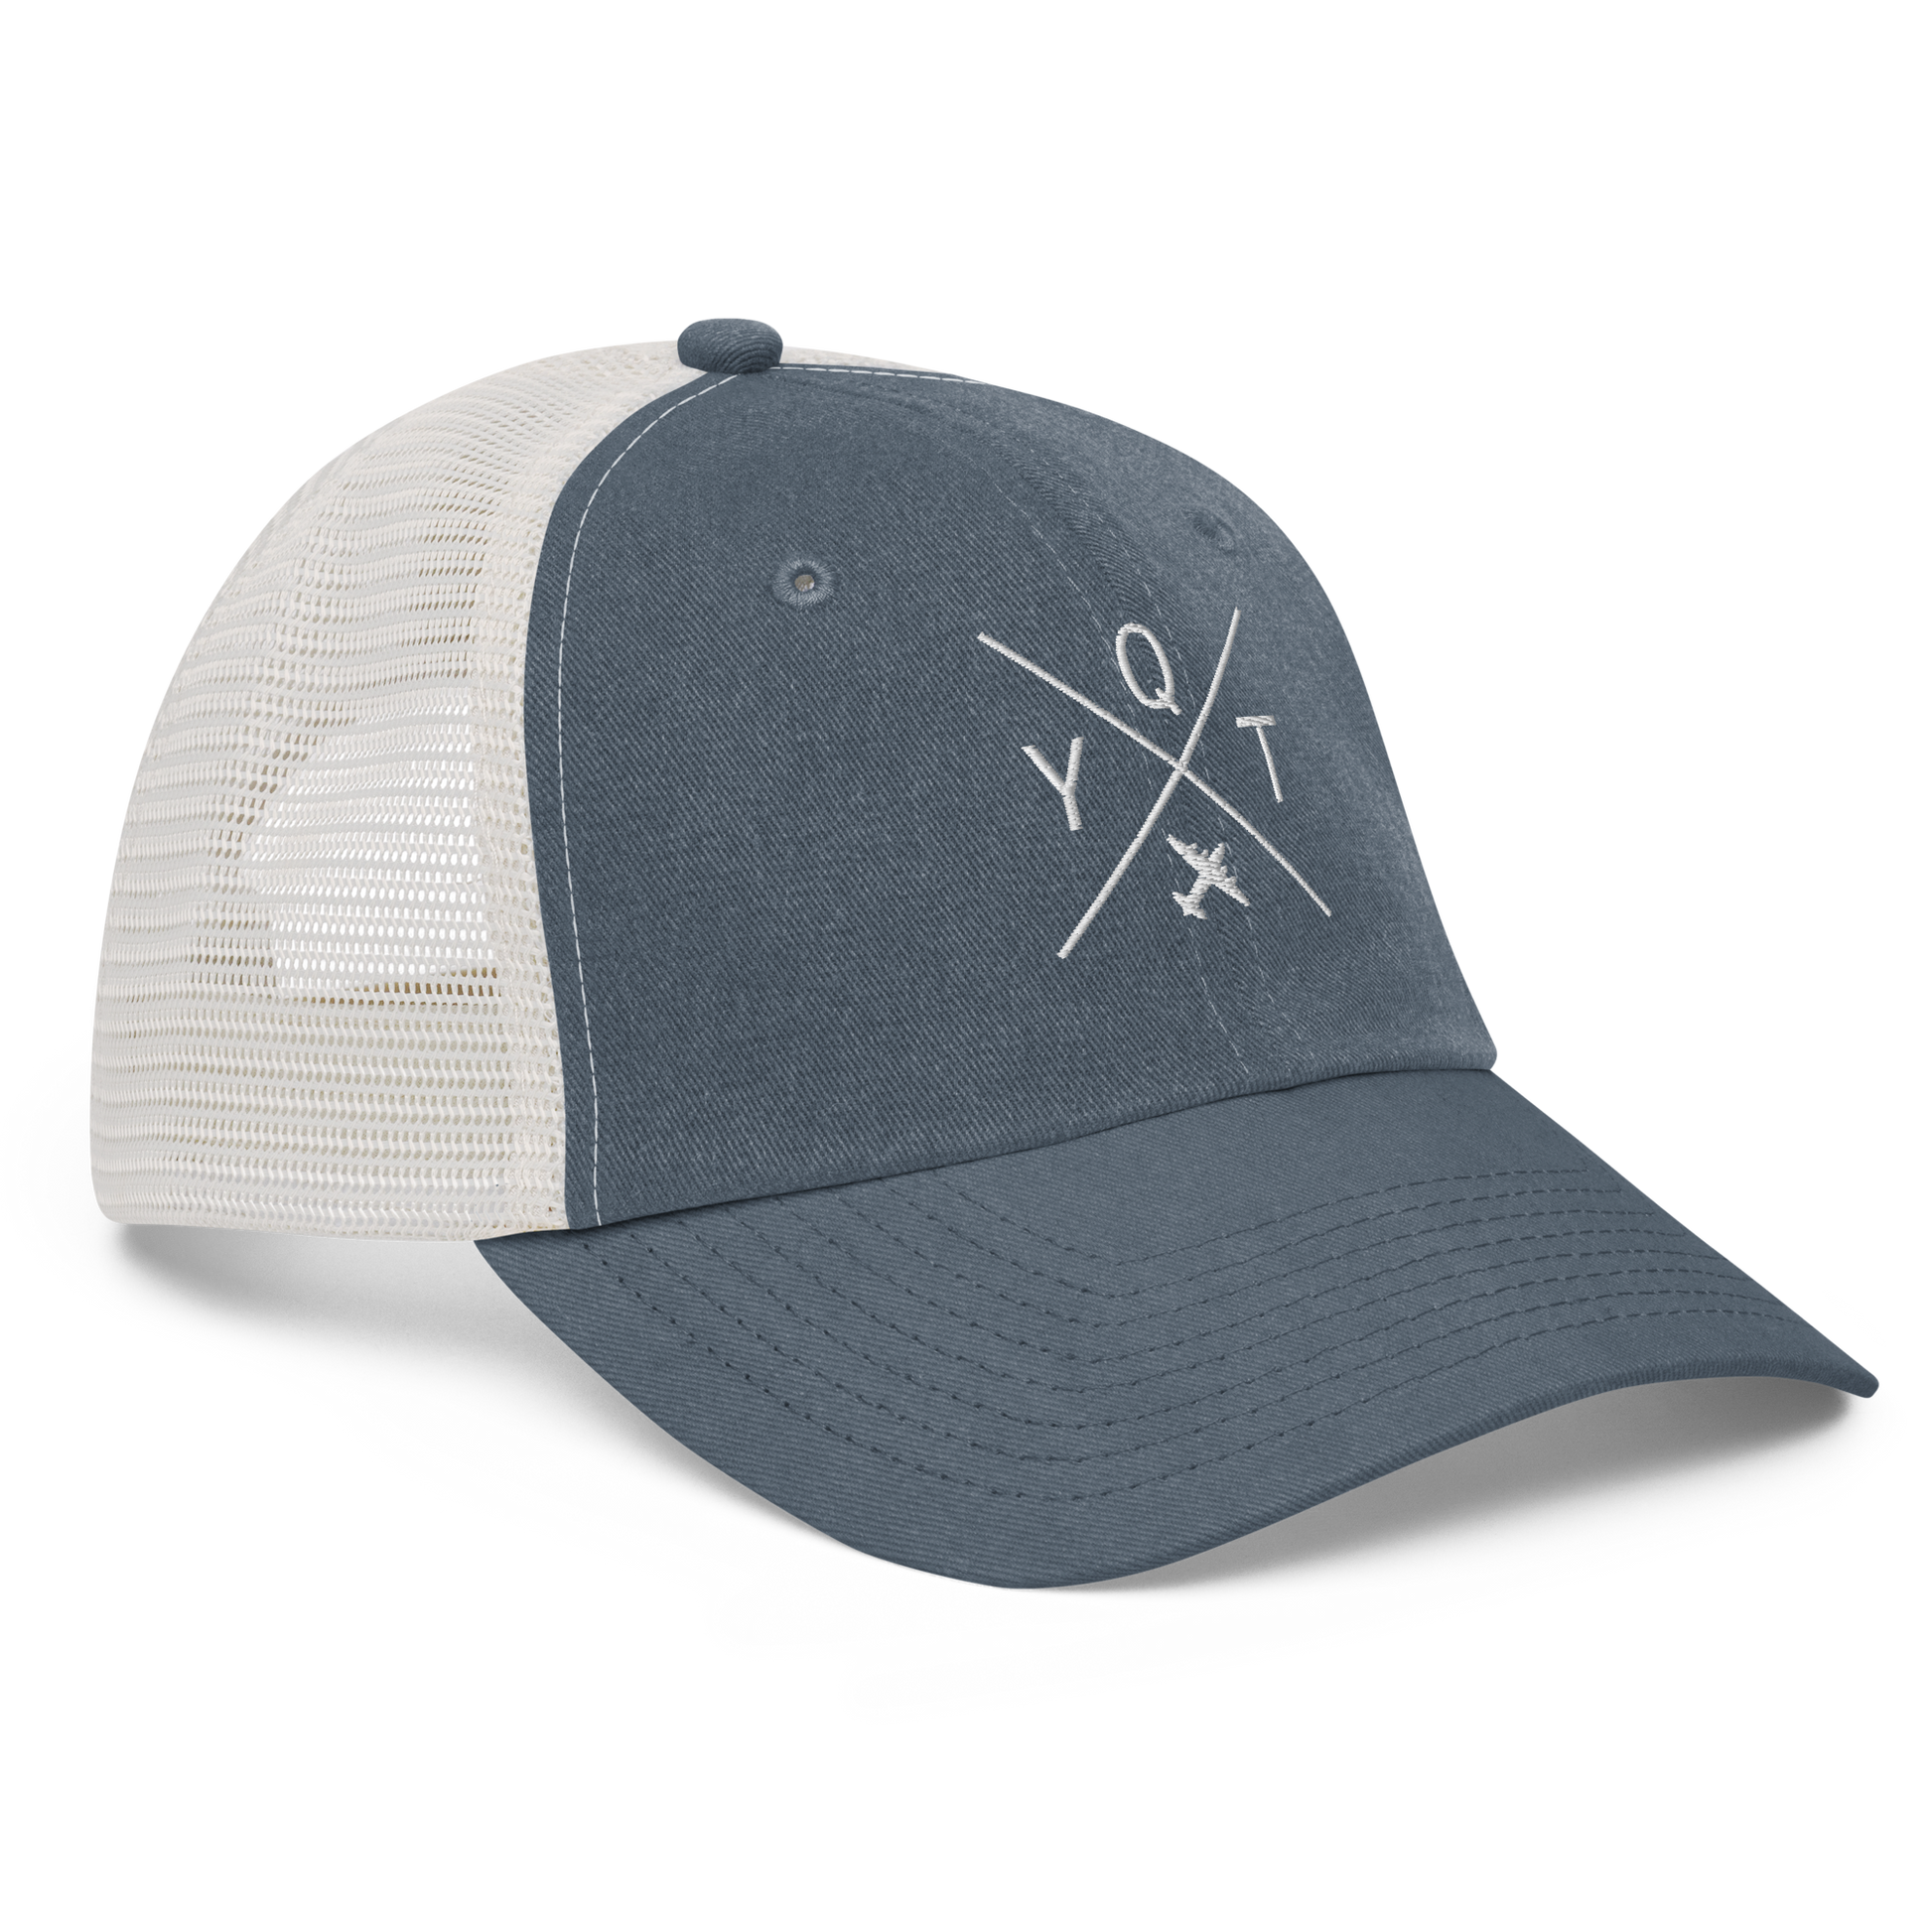 YHM Designs - YQT Thunder Bay Pigment-Dyed Trucker Cap - Crossed-X Design with Airport Code and Vintage Propliner - White Embroidery - Image 07